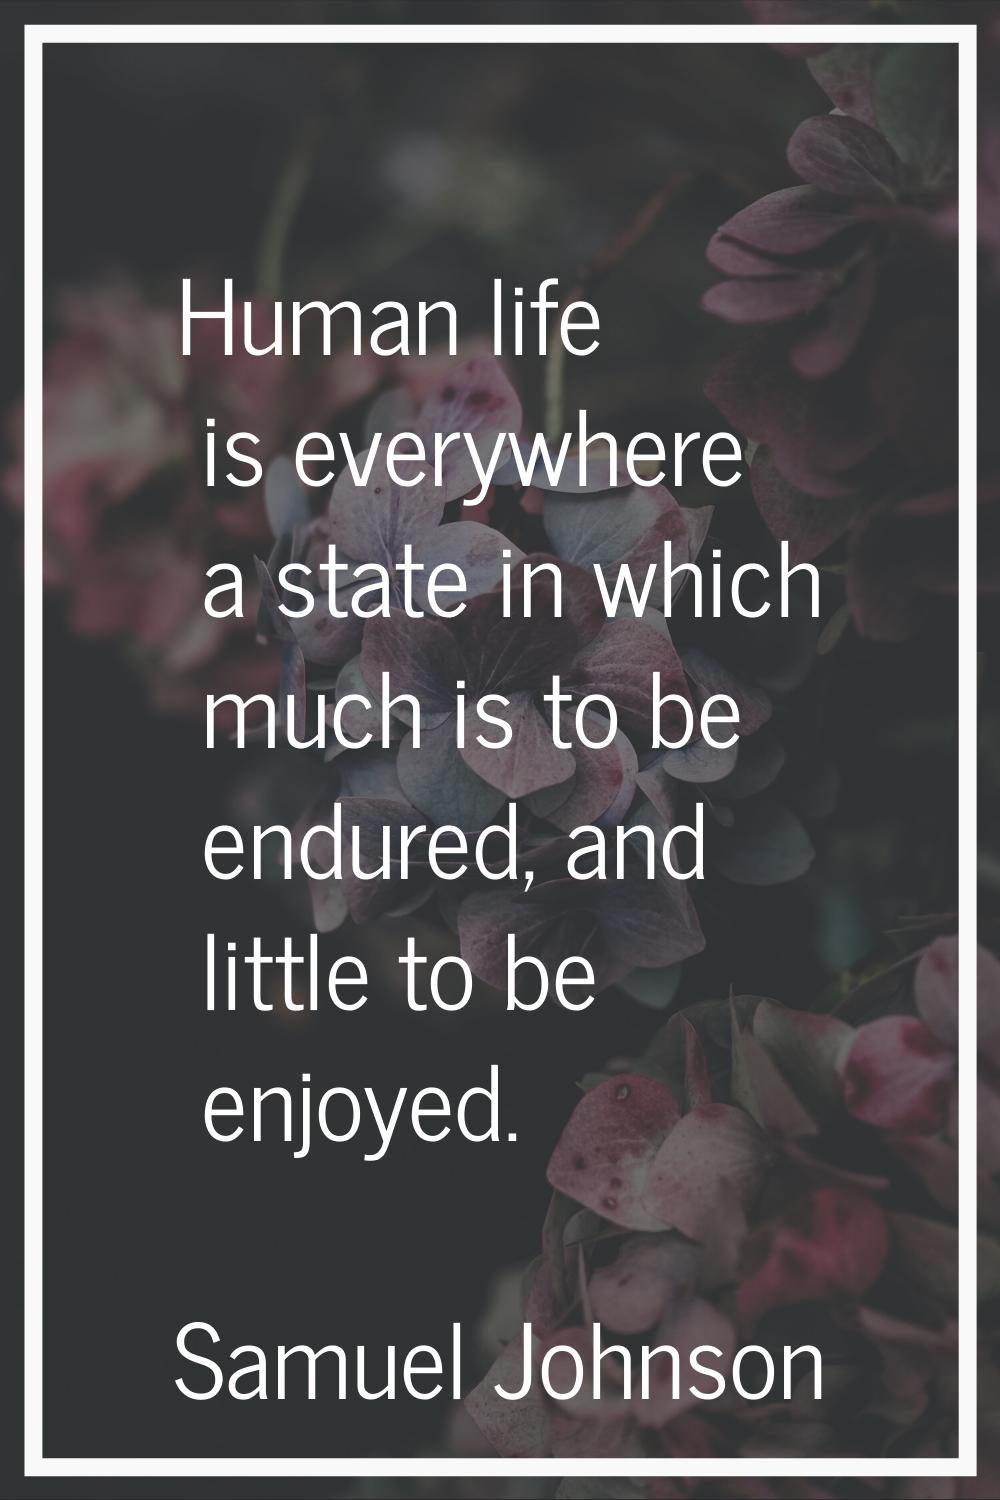 Human life is everywhere a state in which much is to be endured, and little to be enjoyed.